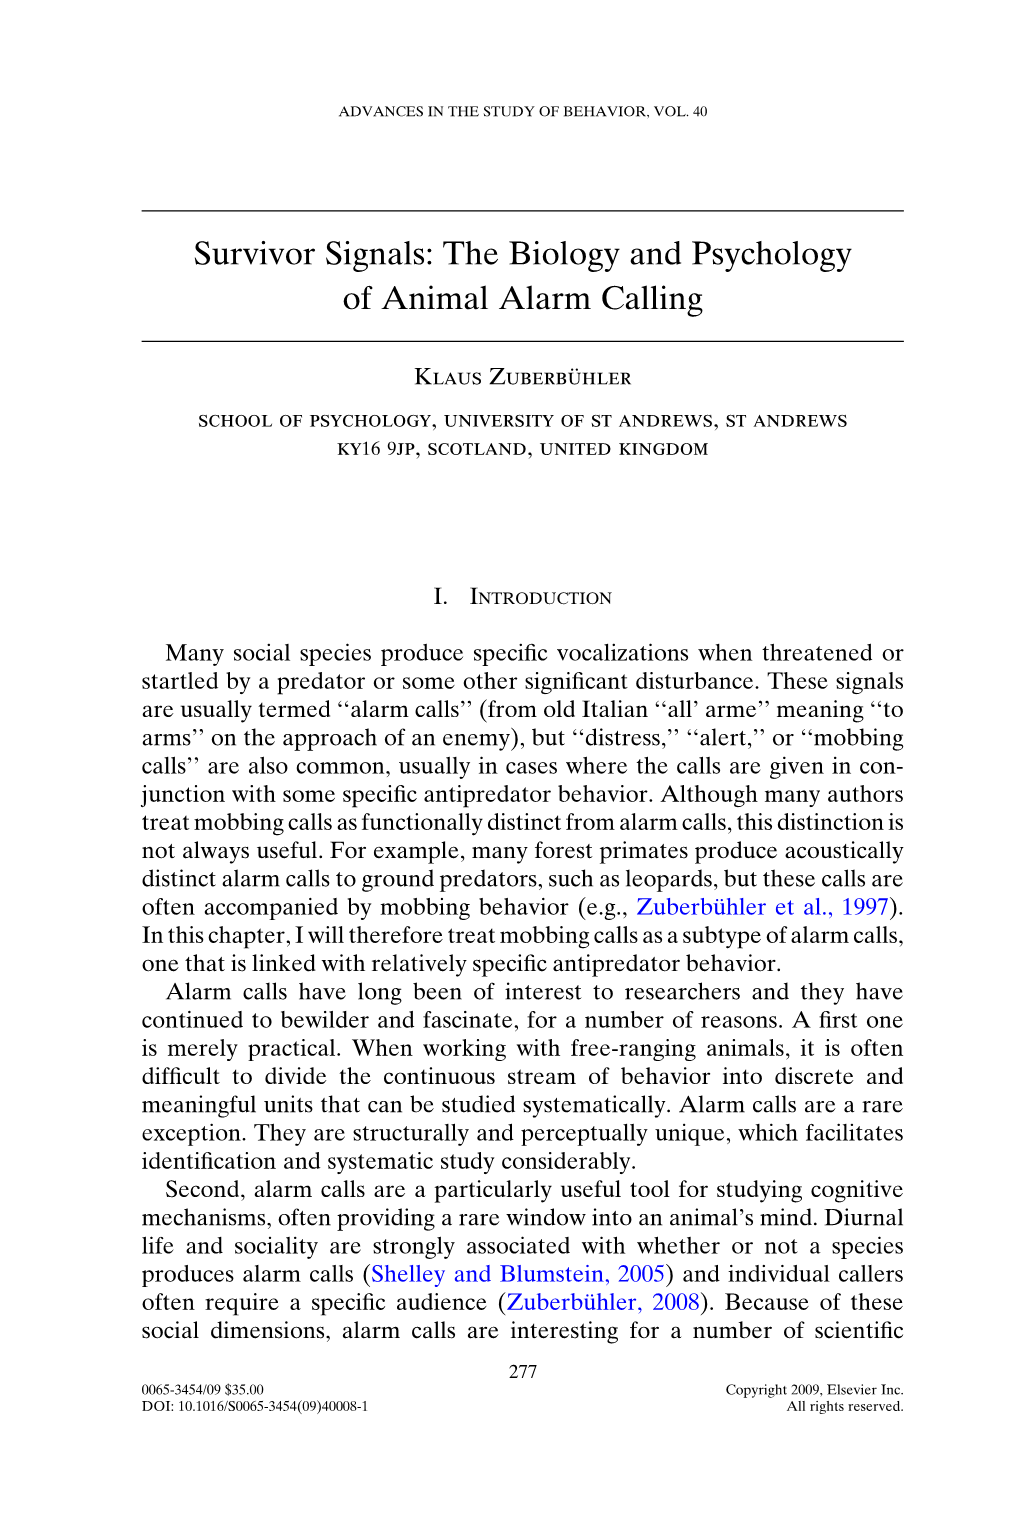 The Biology and Psychology of Animal Alarm Calling